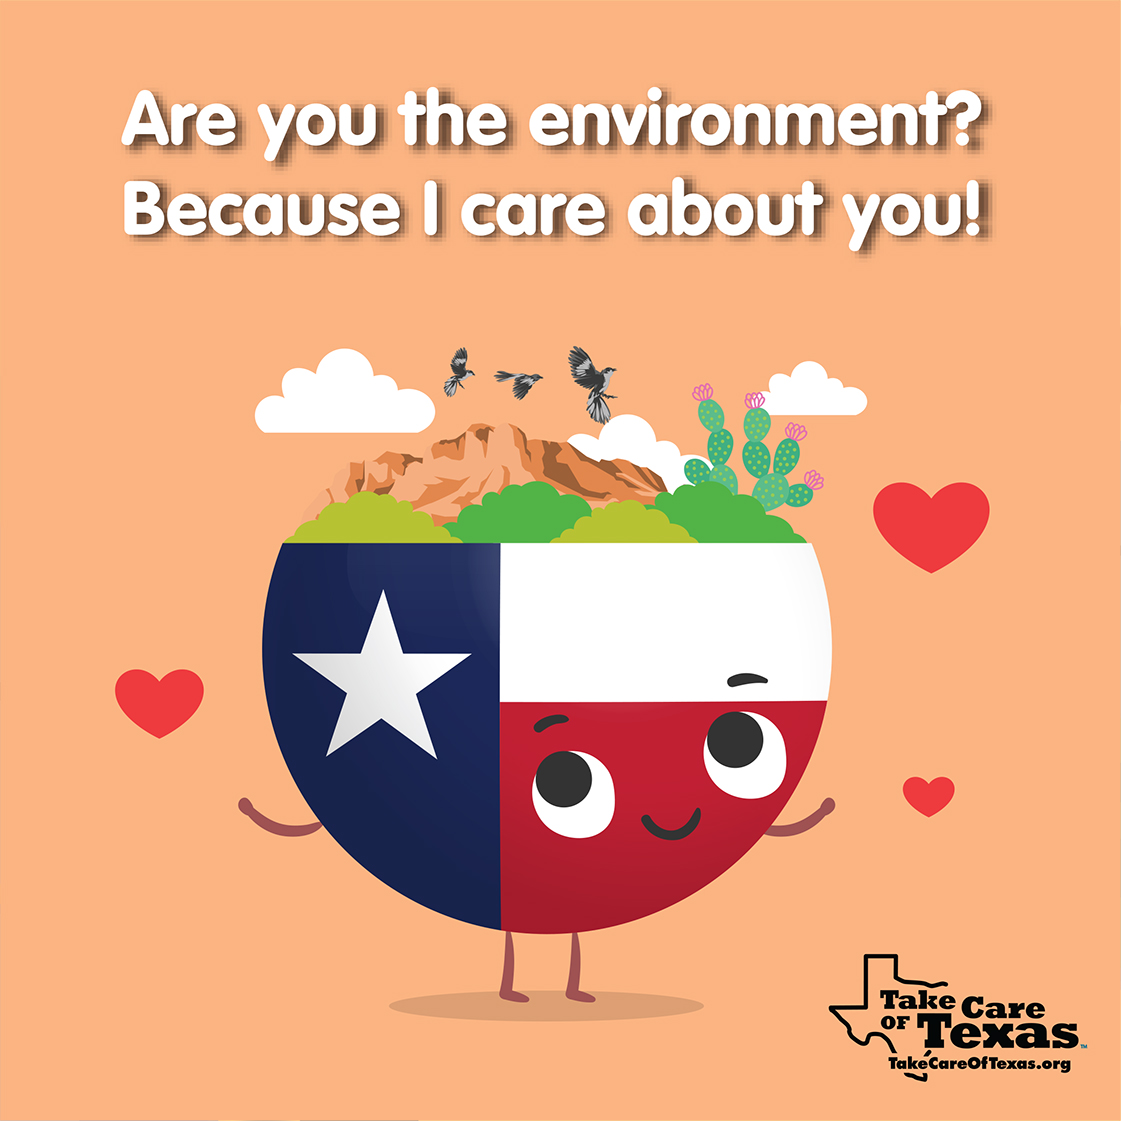 Are you the environment? Because I care about you!